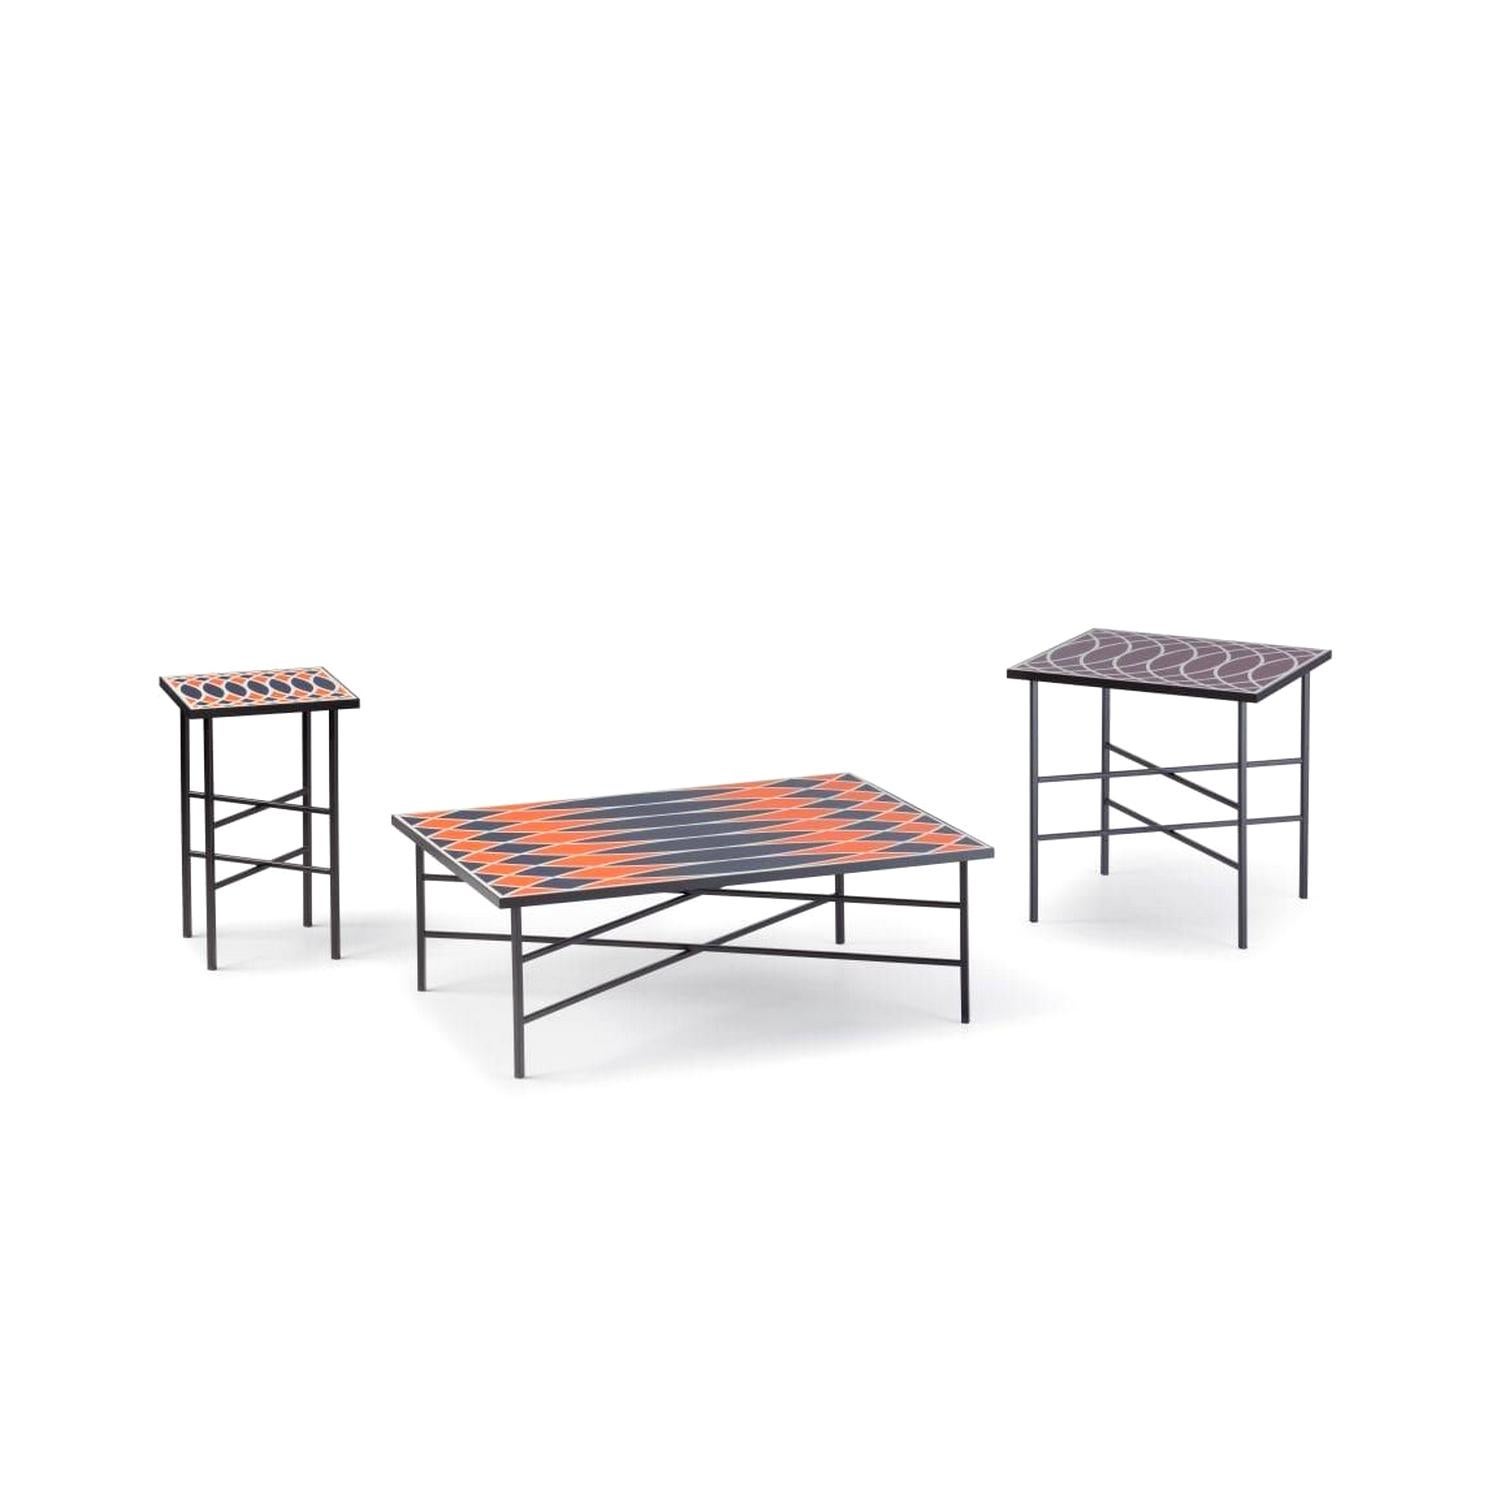 Steel In Stock in Los Angeles, Motif Coffee Table by Analogia Project, Made in Italy